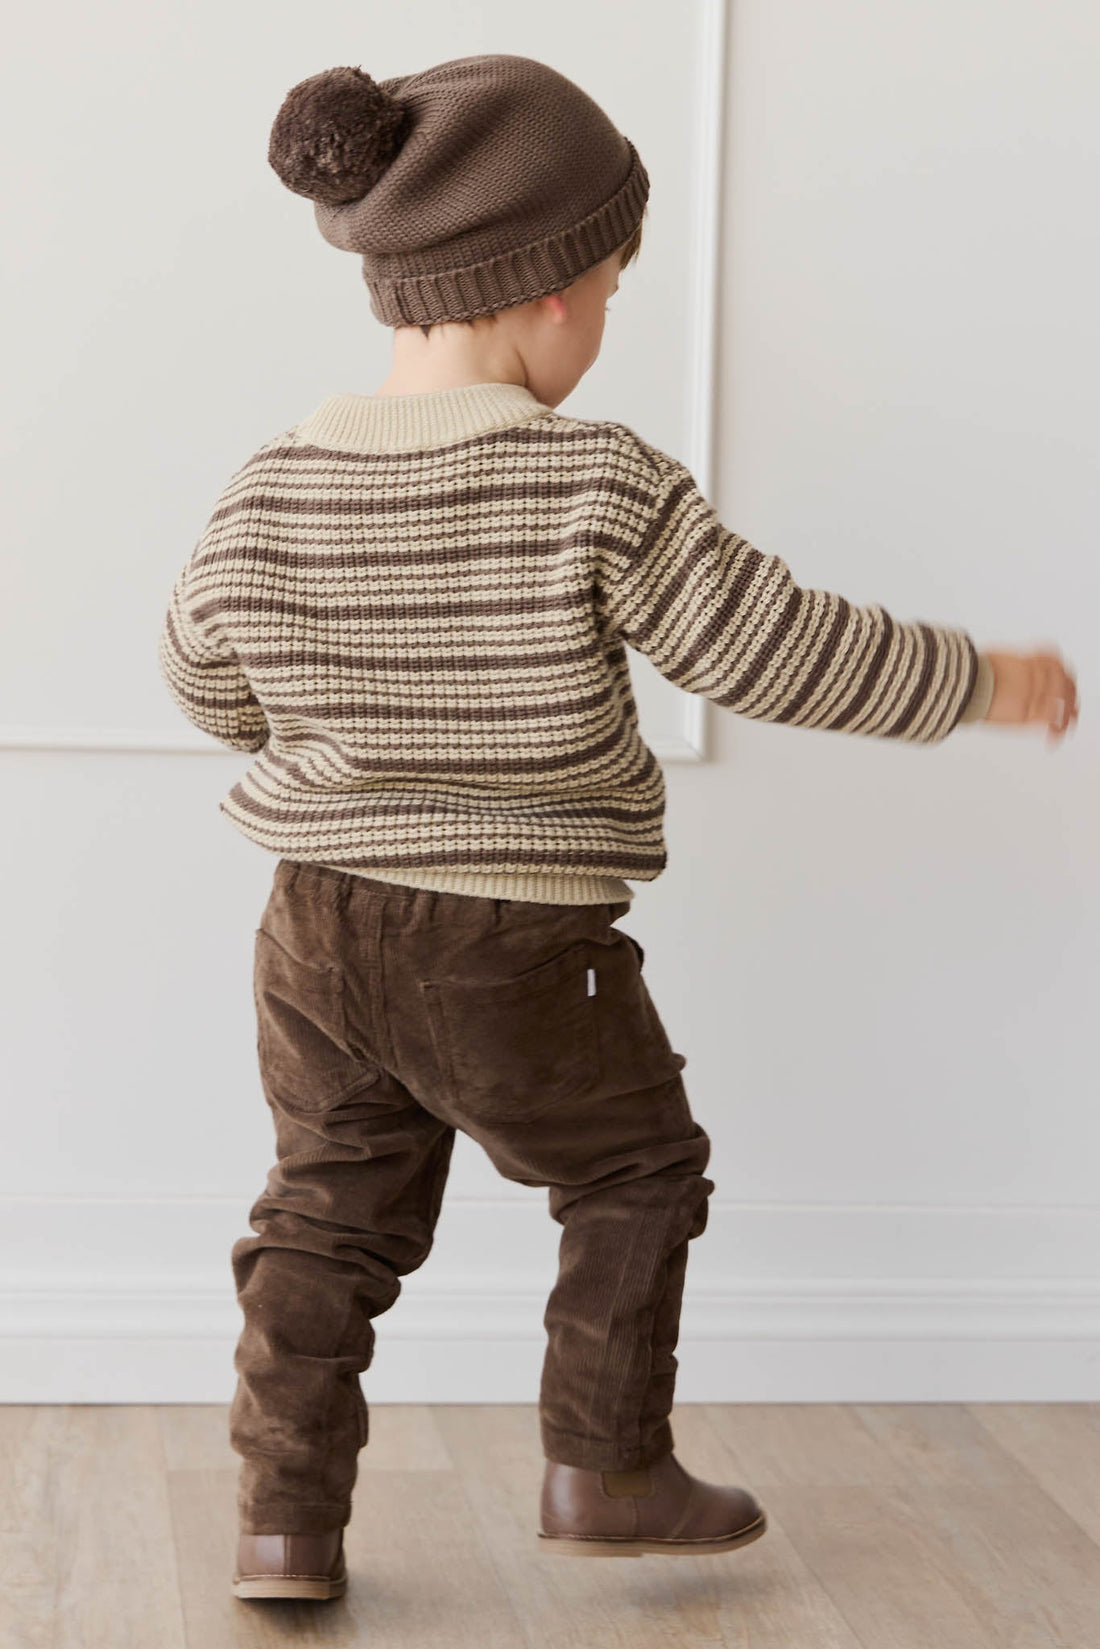 Cillian Cord Pant - Brownie Childrens Pant from Jamie Kay NZ